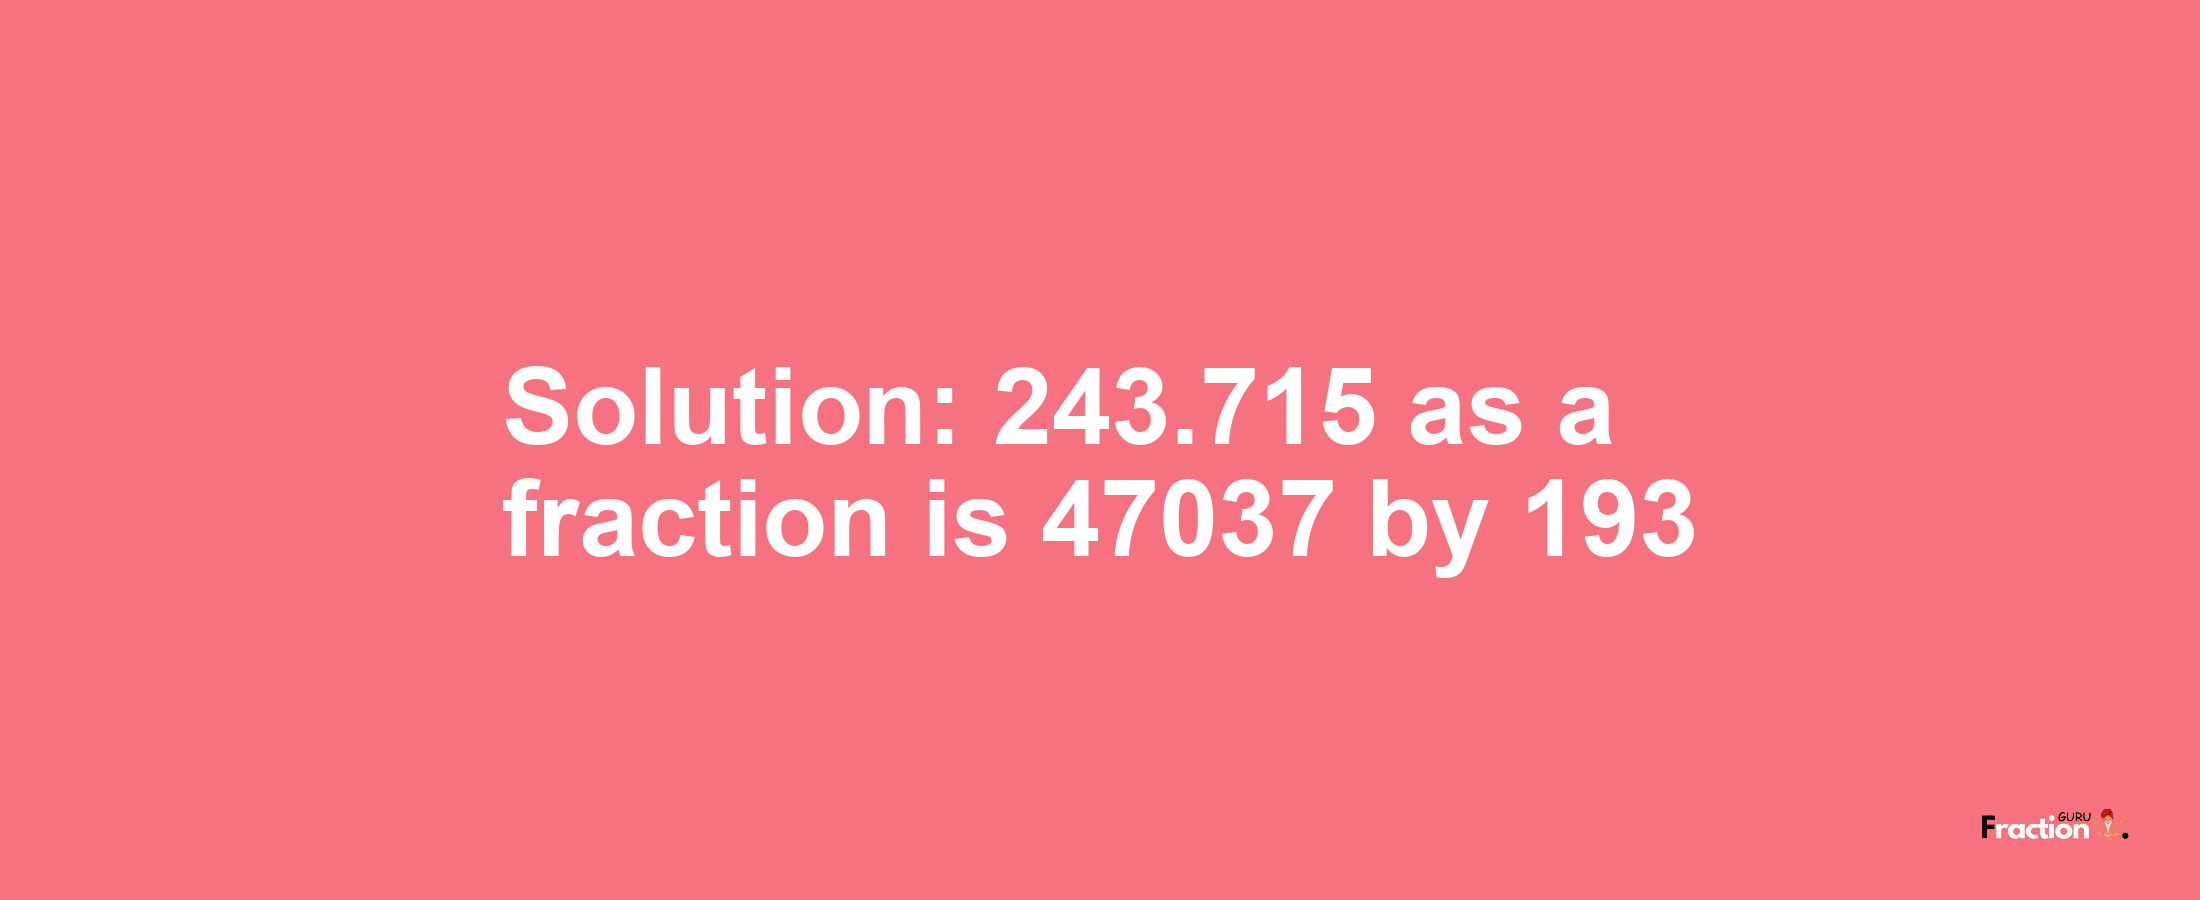 Solution:243.715 as a fraction is 47037/193